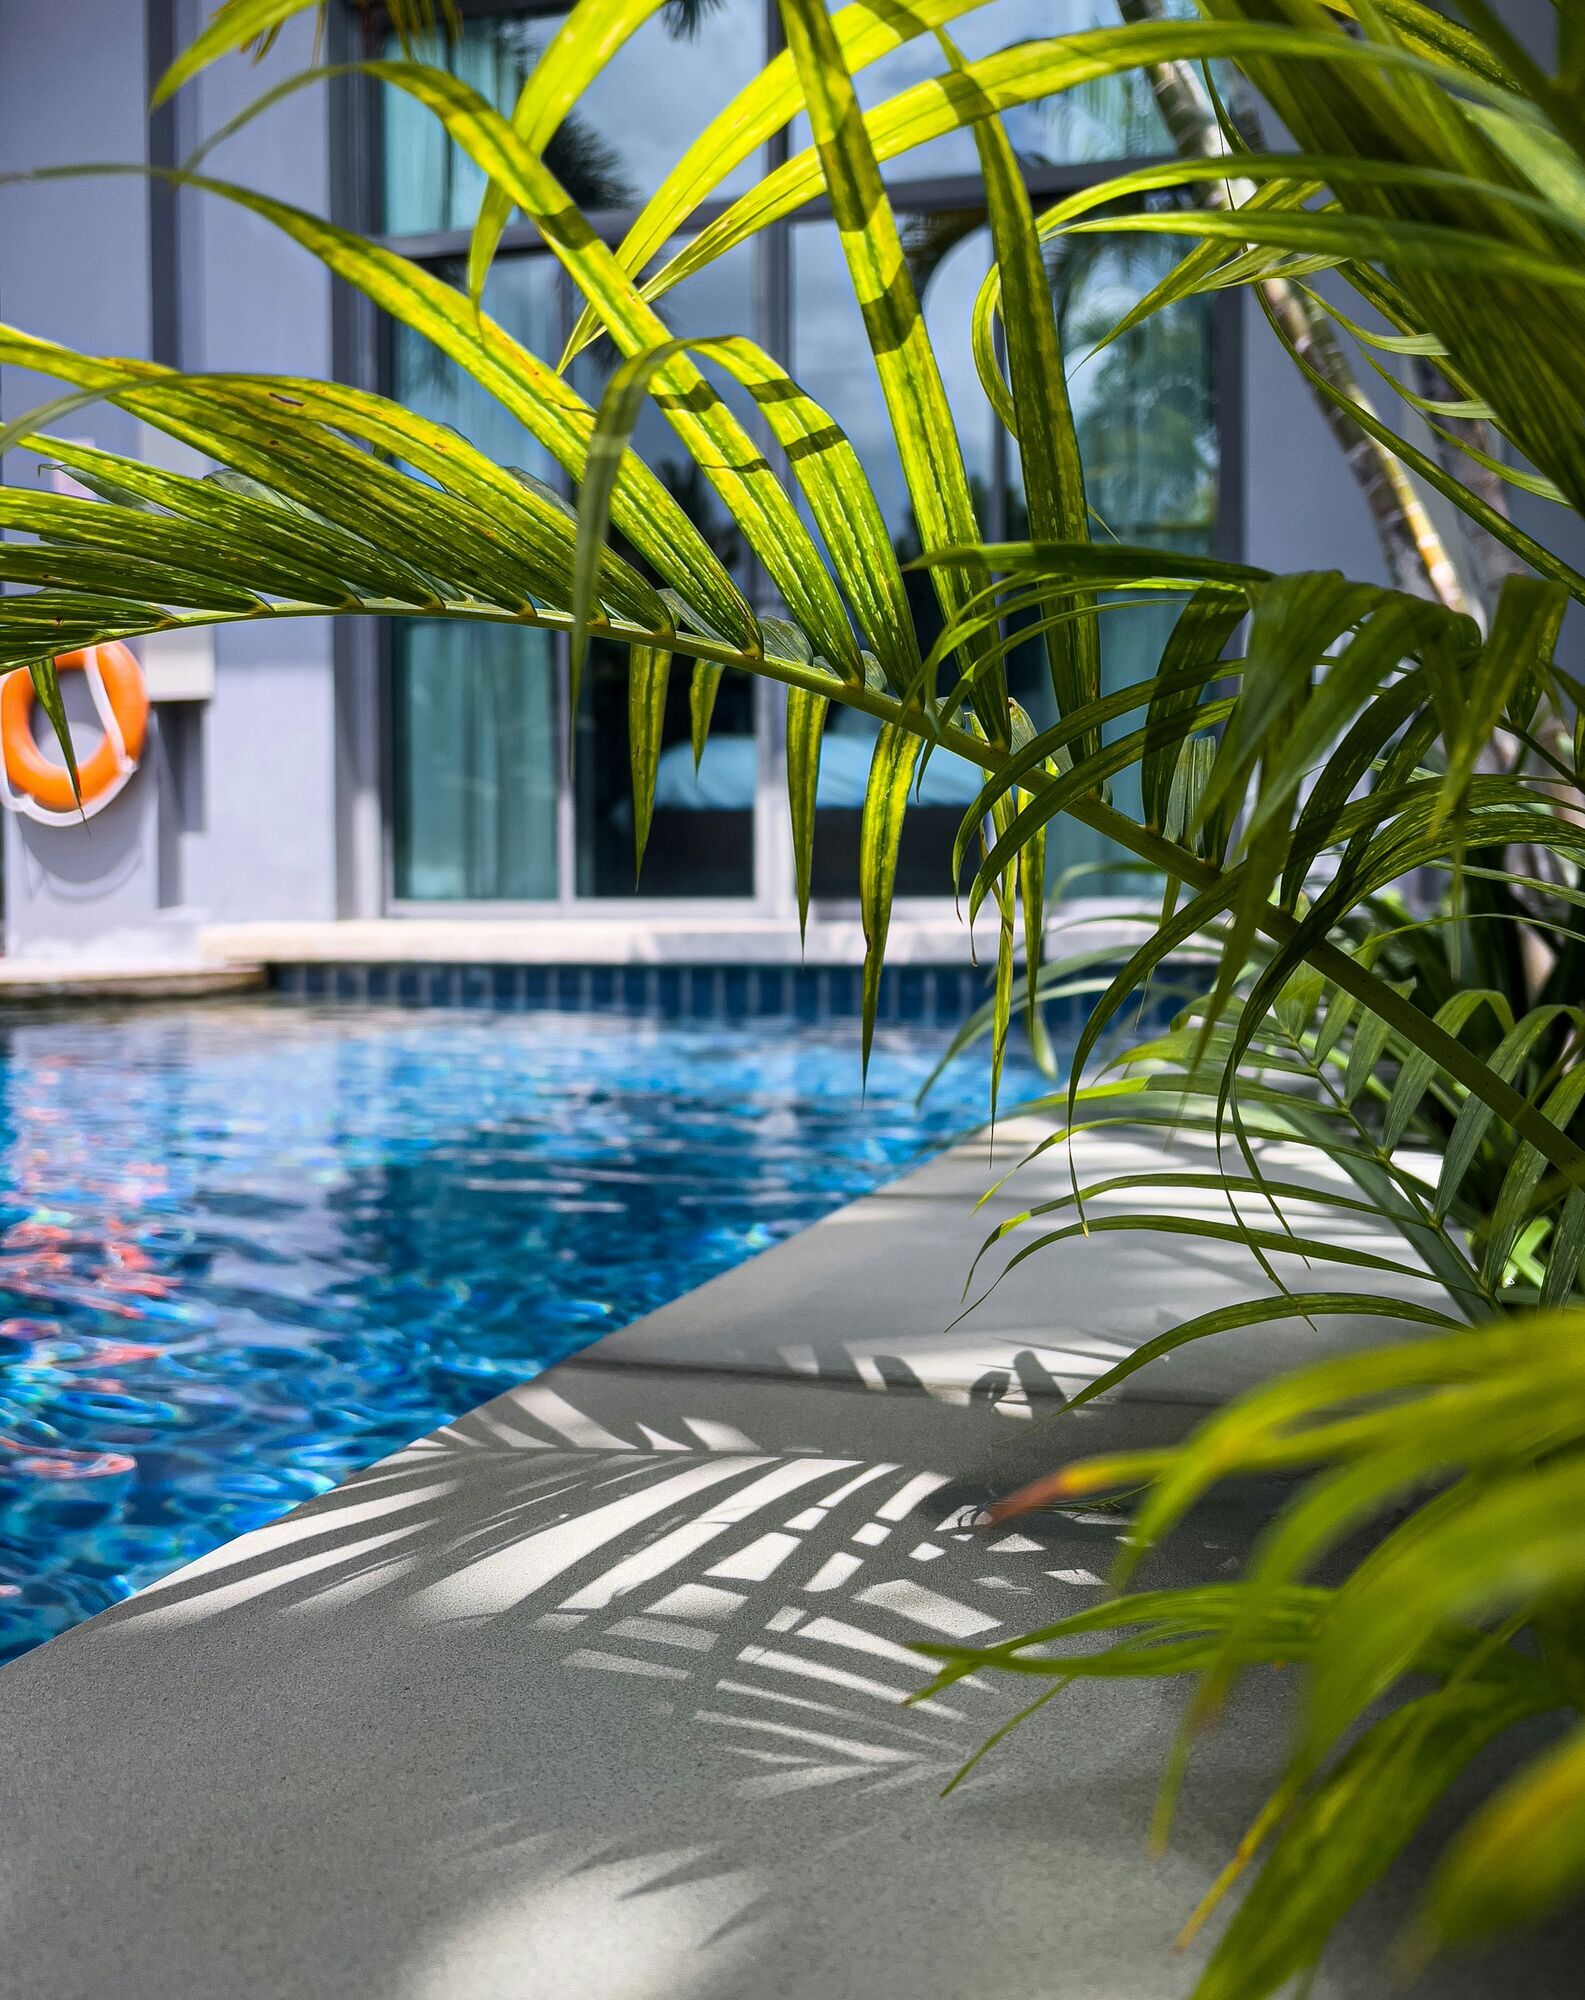 Lush green palm leaves in the foreground with the shadow cast on a grey poolside